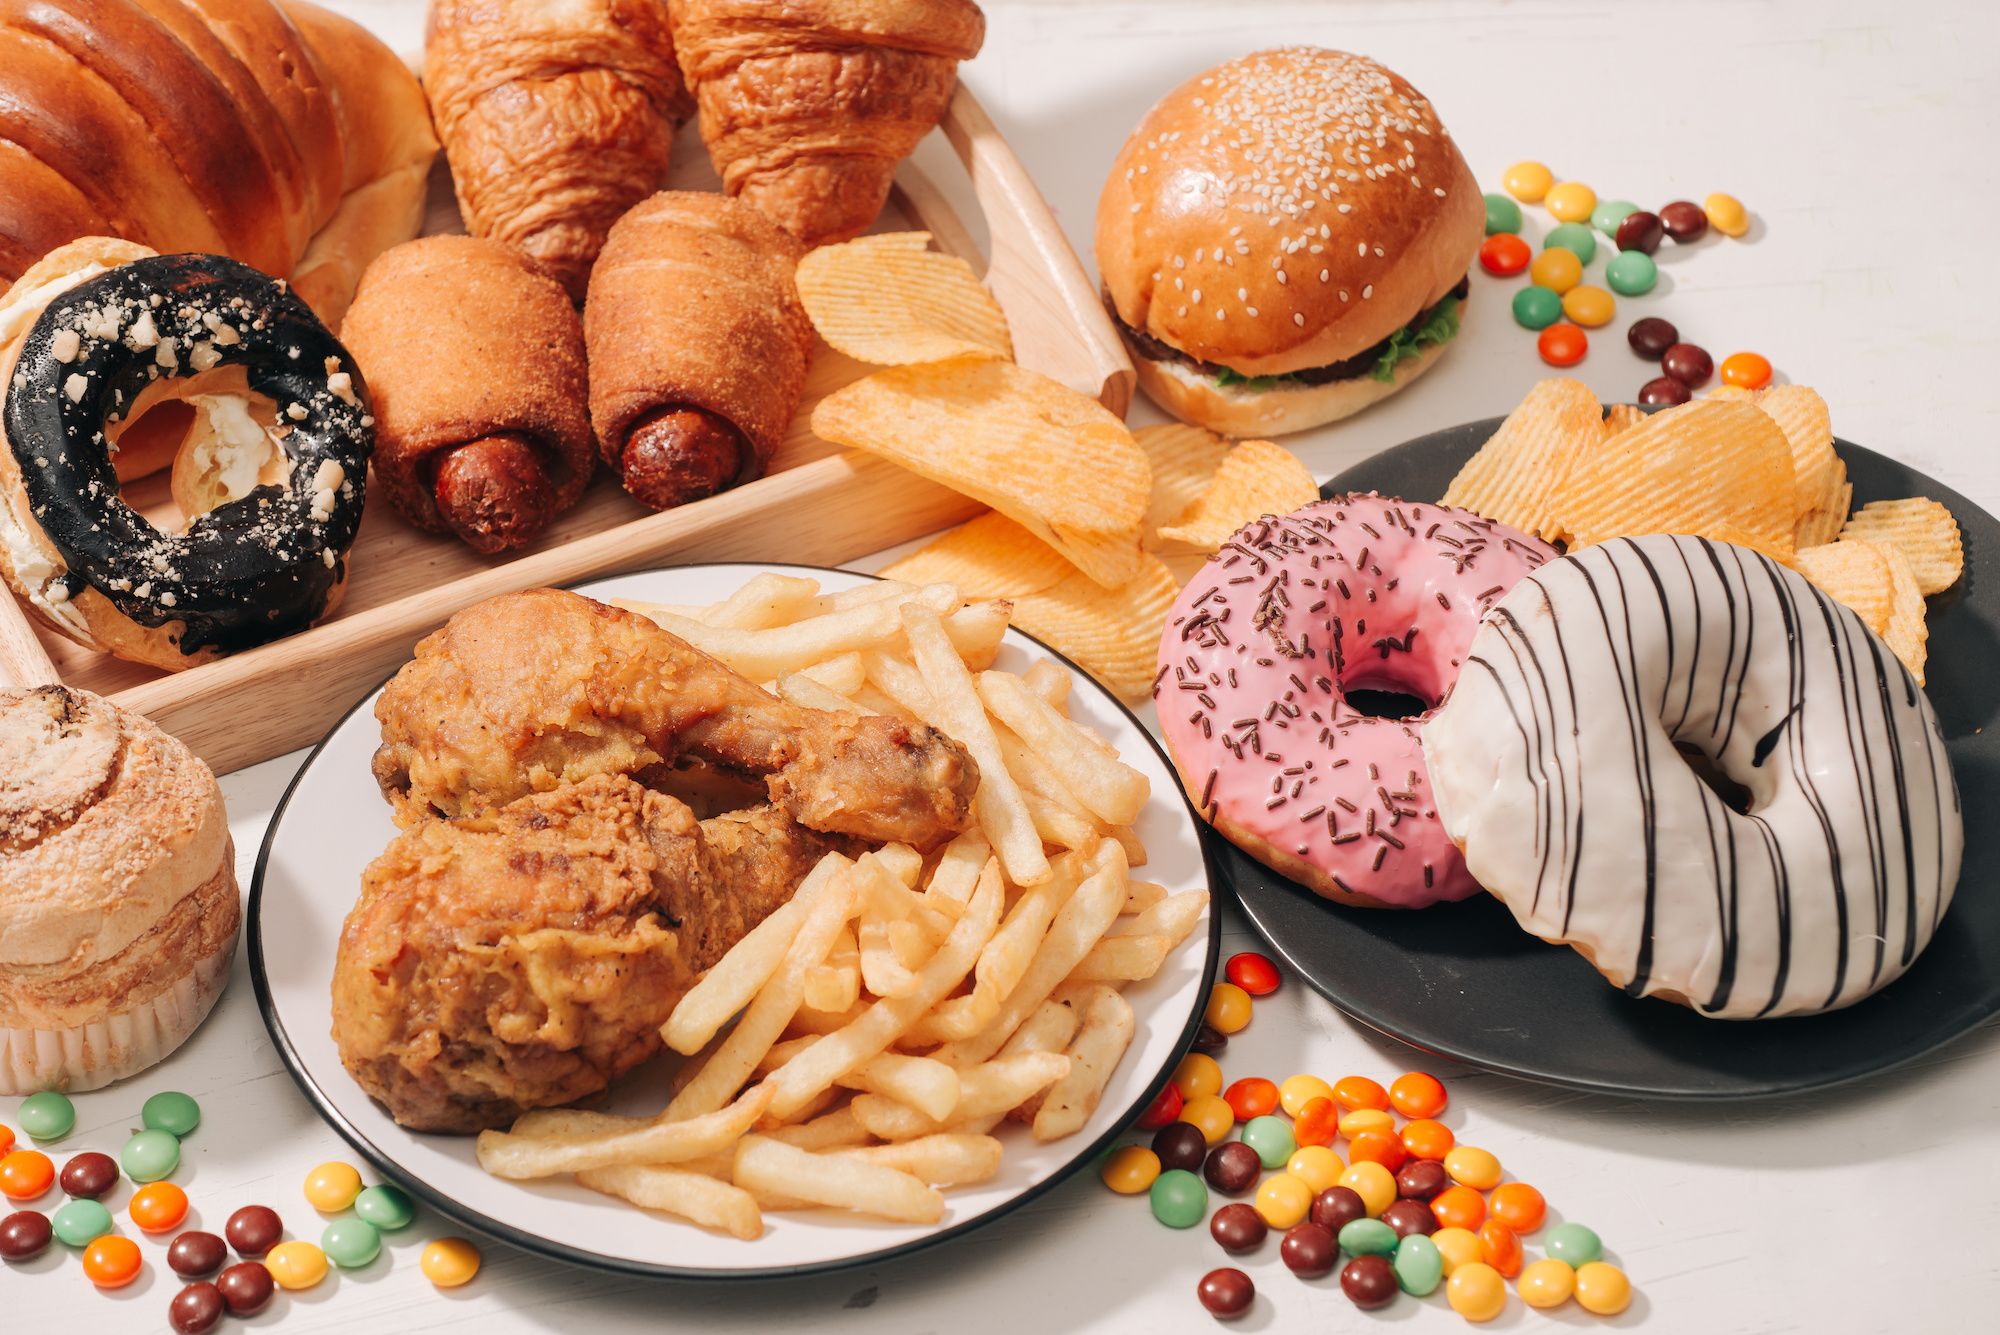 Are all ultra-processed foods really bad for you?